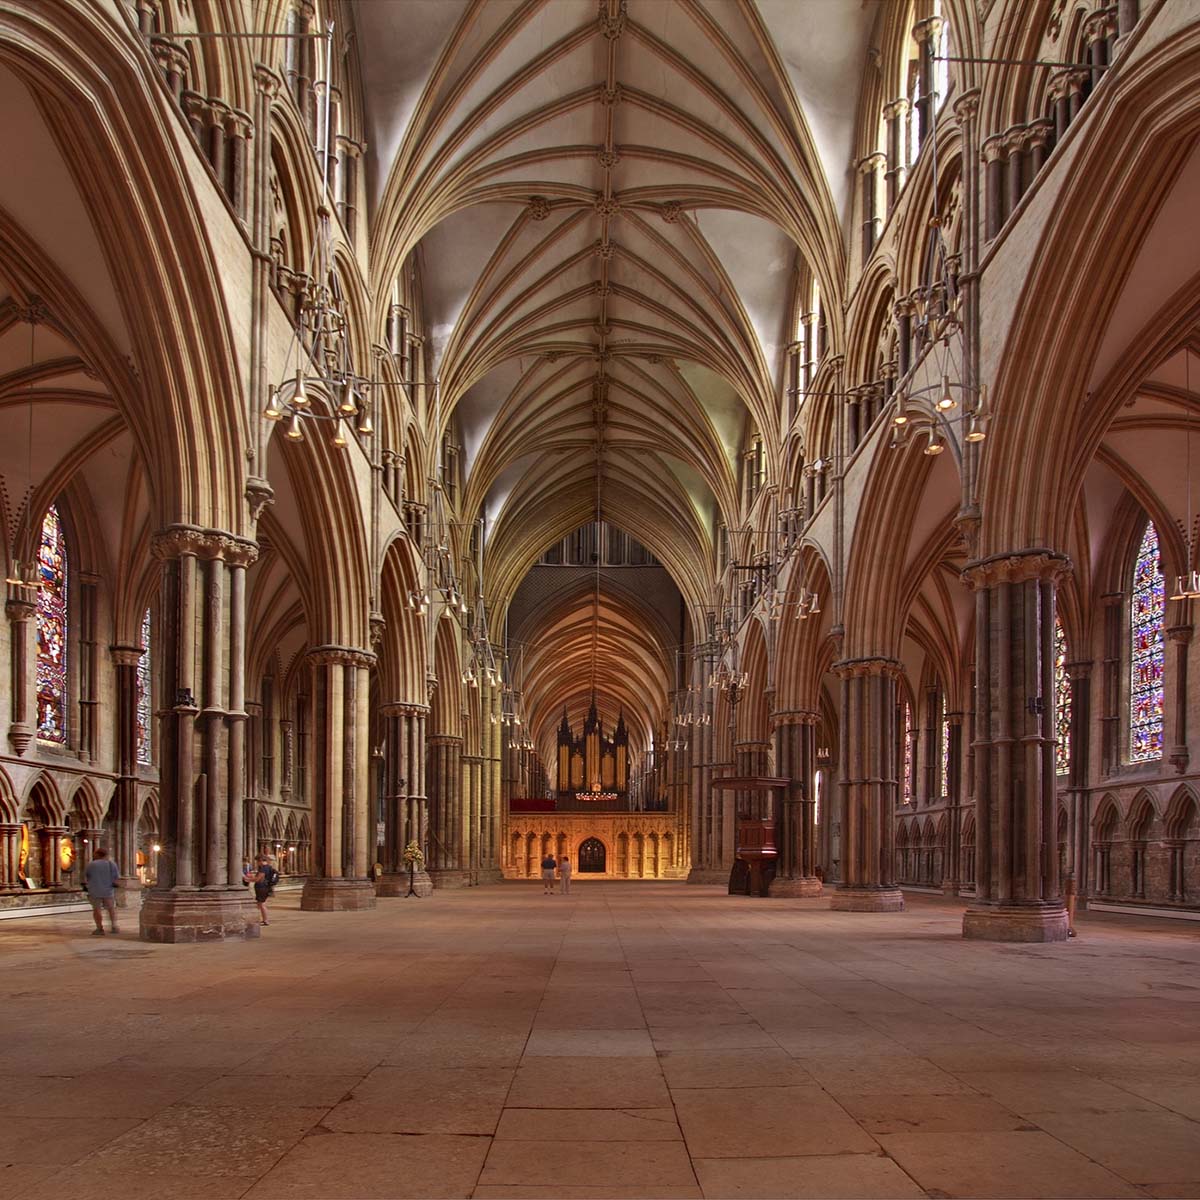 Interior Nave of the Lincoln Cathedral in England